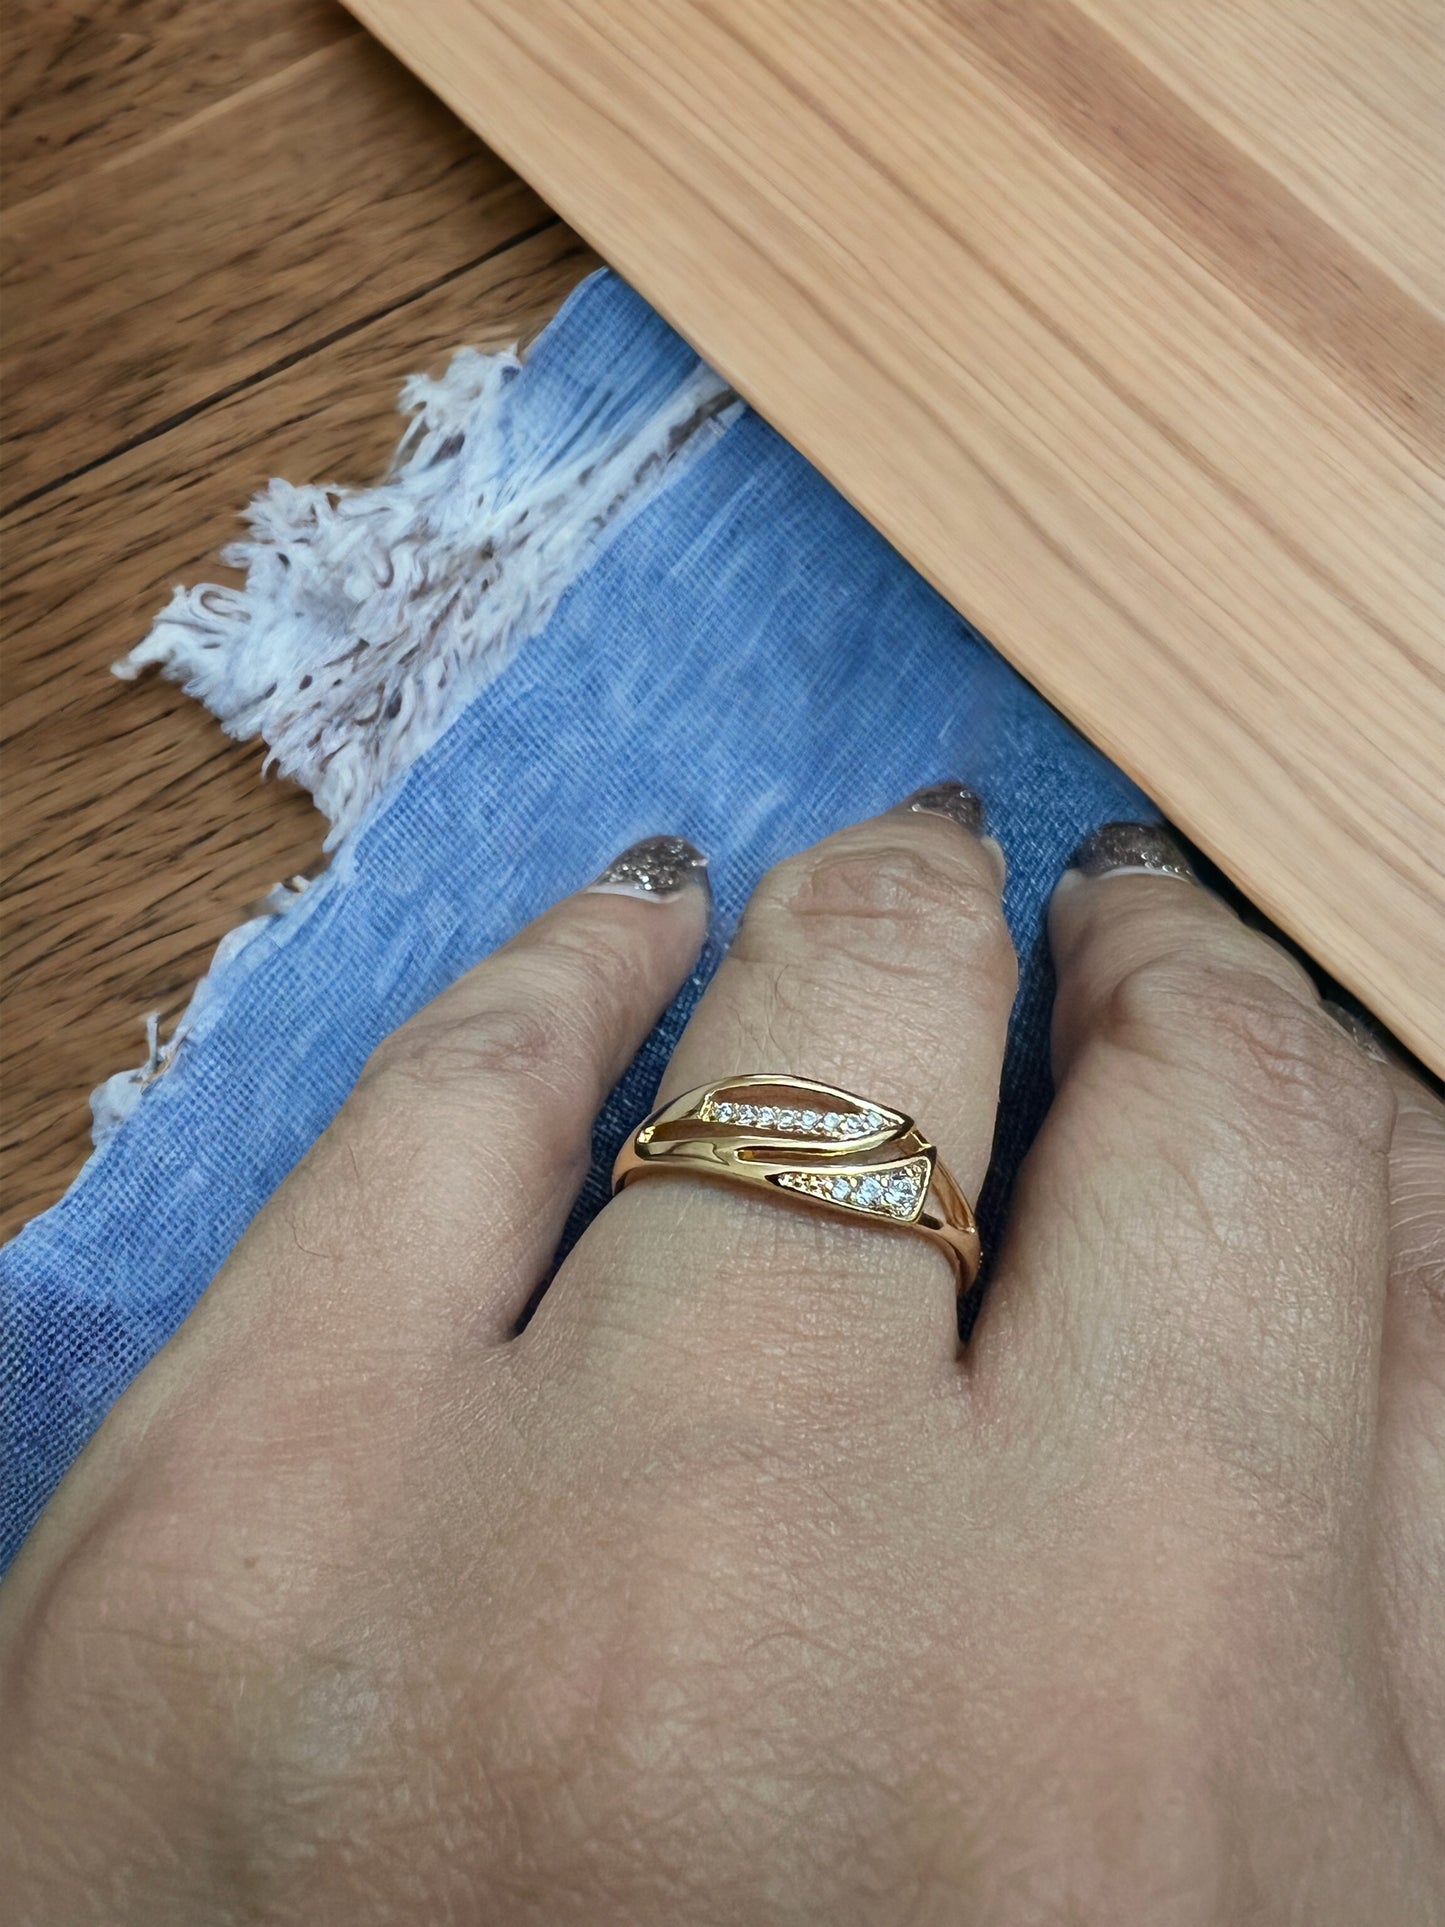 Dainty Gold Band: Delicate Elegance in a 5-Line Design - Minimalist Jewelry for Effortless Style